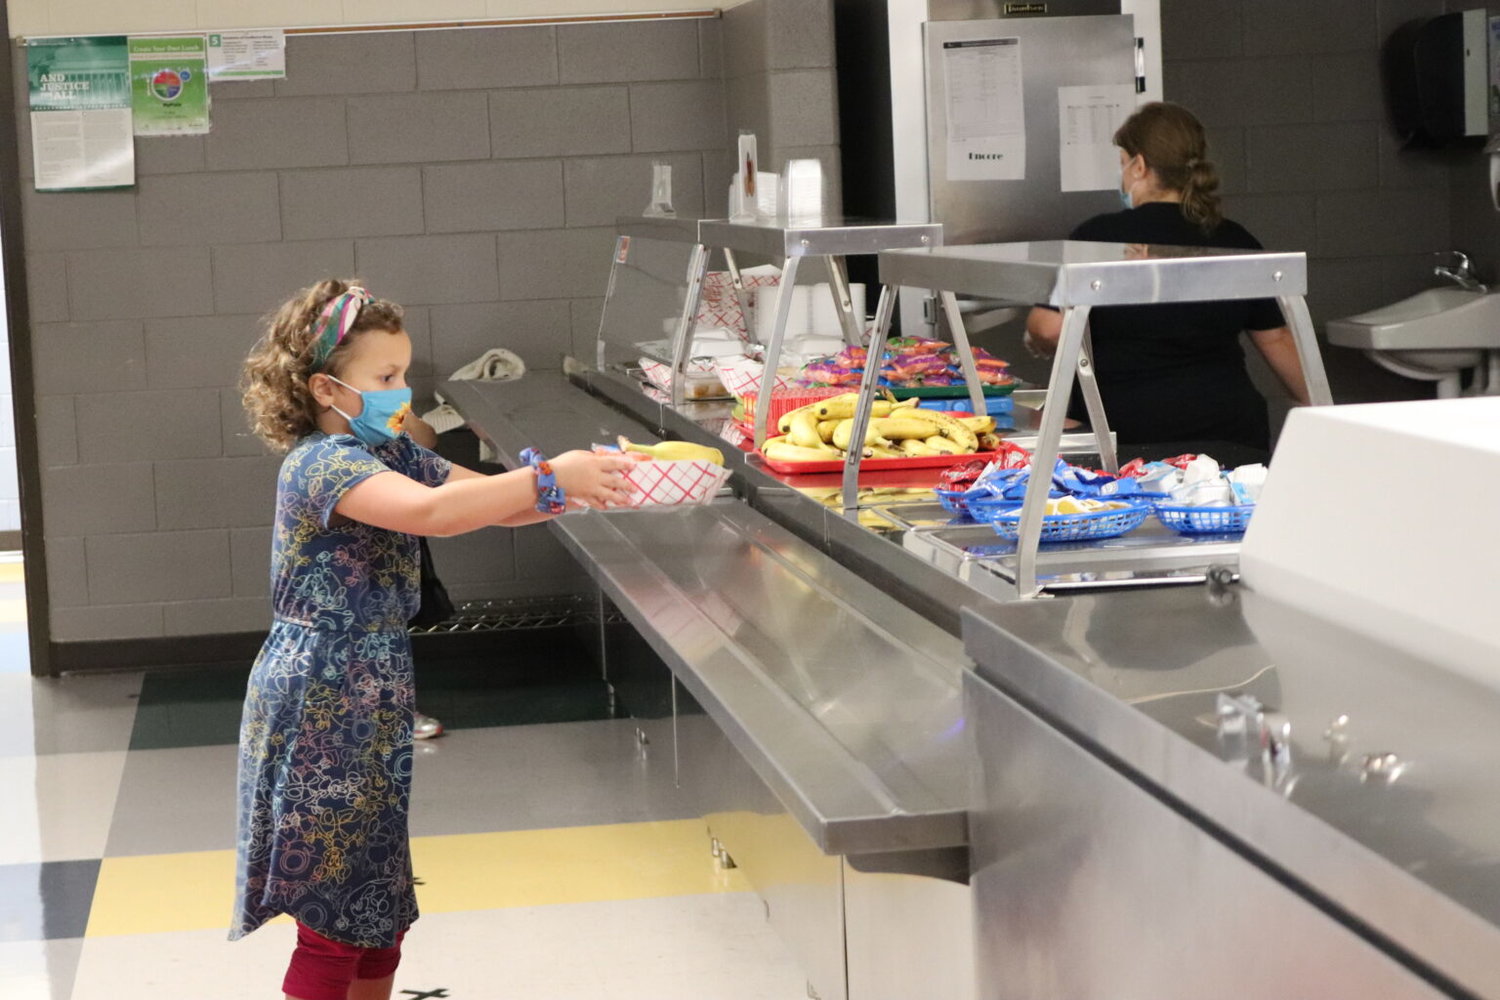 Students receive free breakfast and lunch as part of Explore, Springfield Public Schools’ summer learning program during which more than 8,000 students were served each day, including grab and go meals for virtual learners (Photo courtesy of Springfield Public Schools).